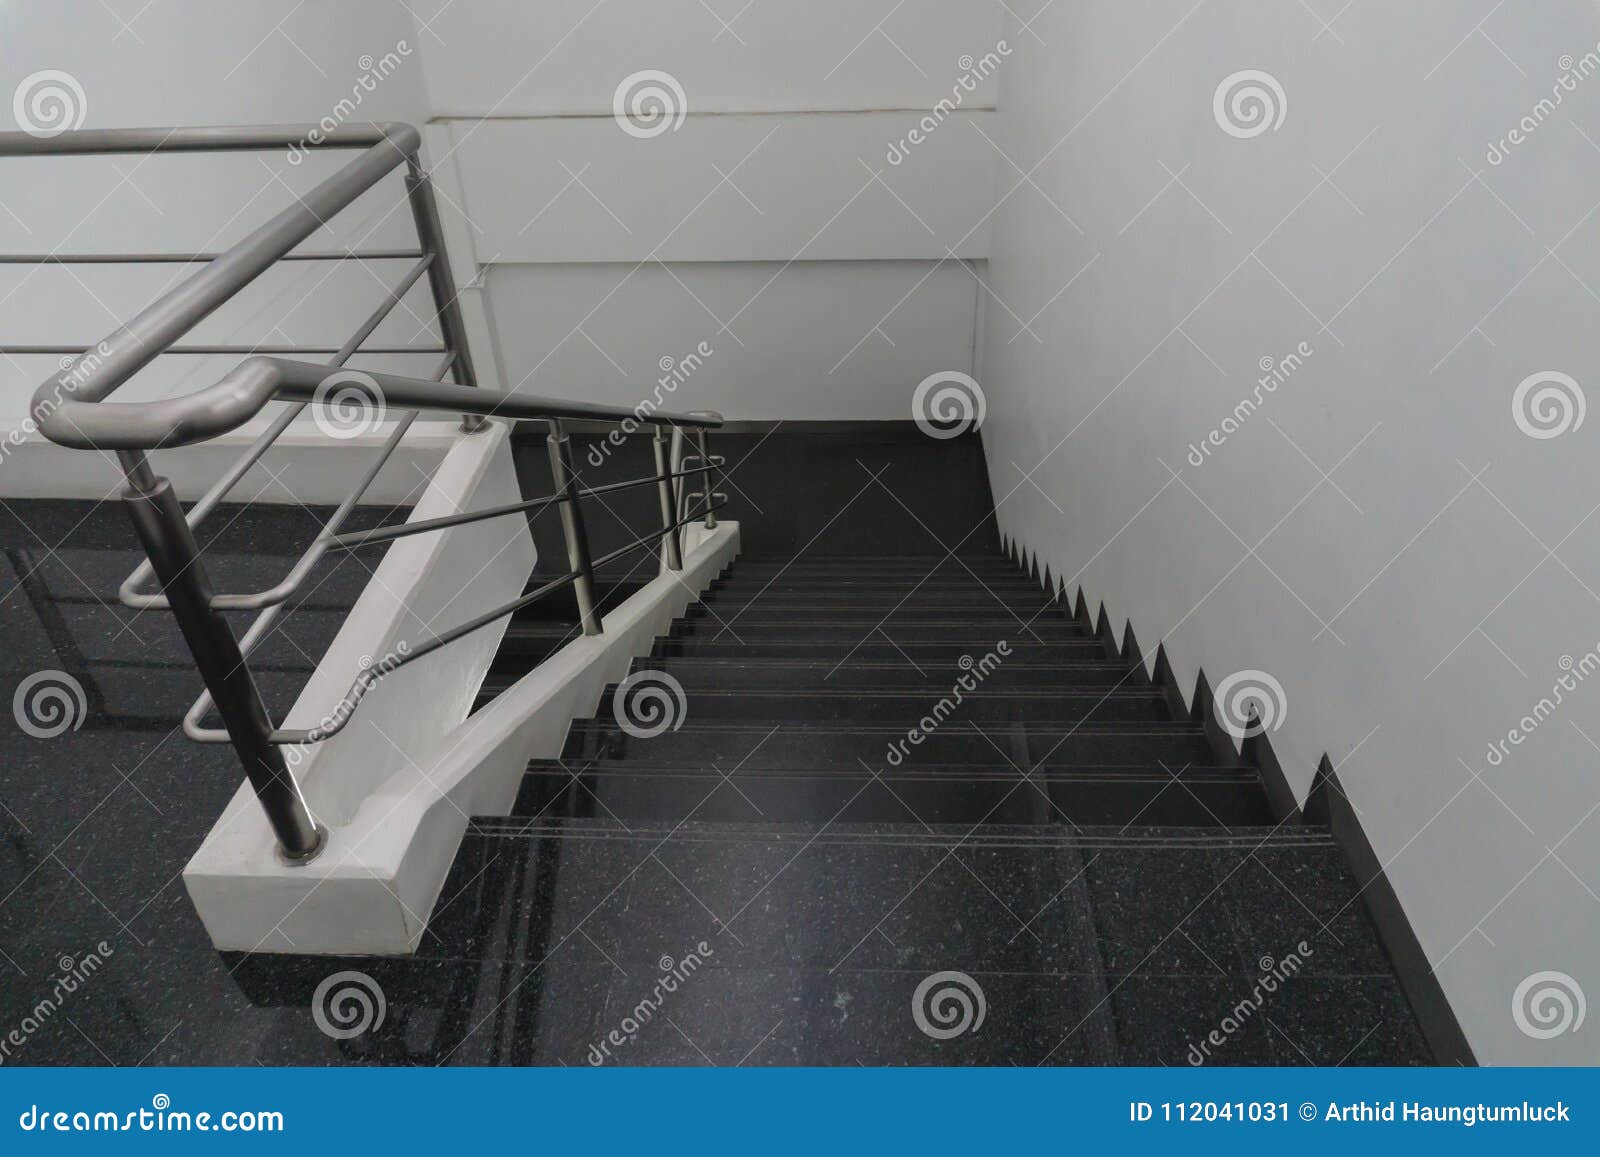 old staircase with a handrail in a building., in the office